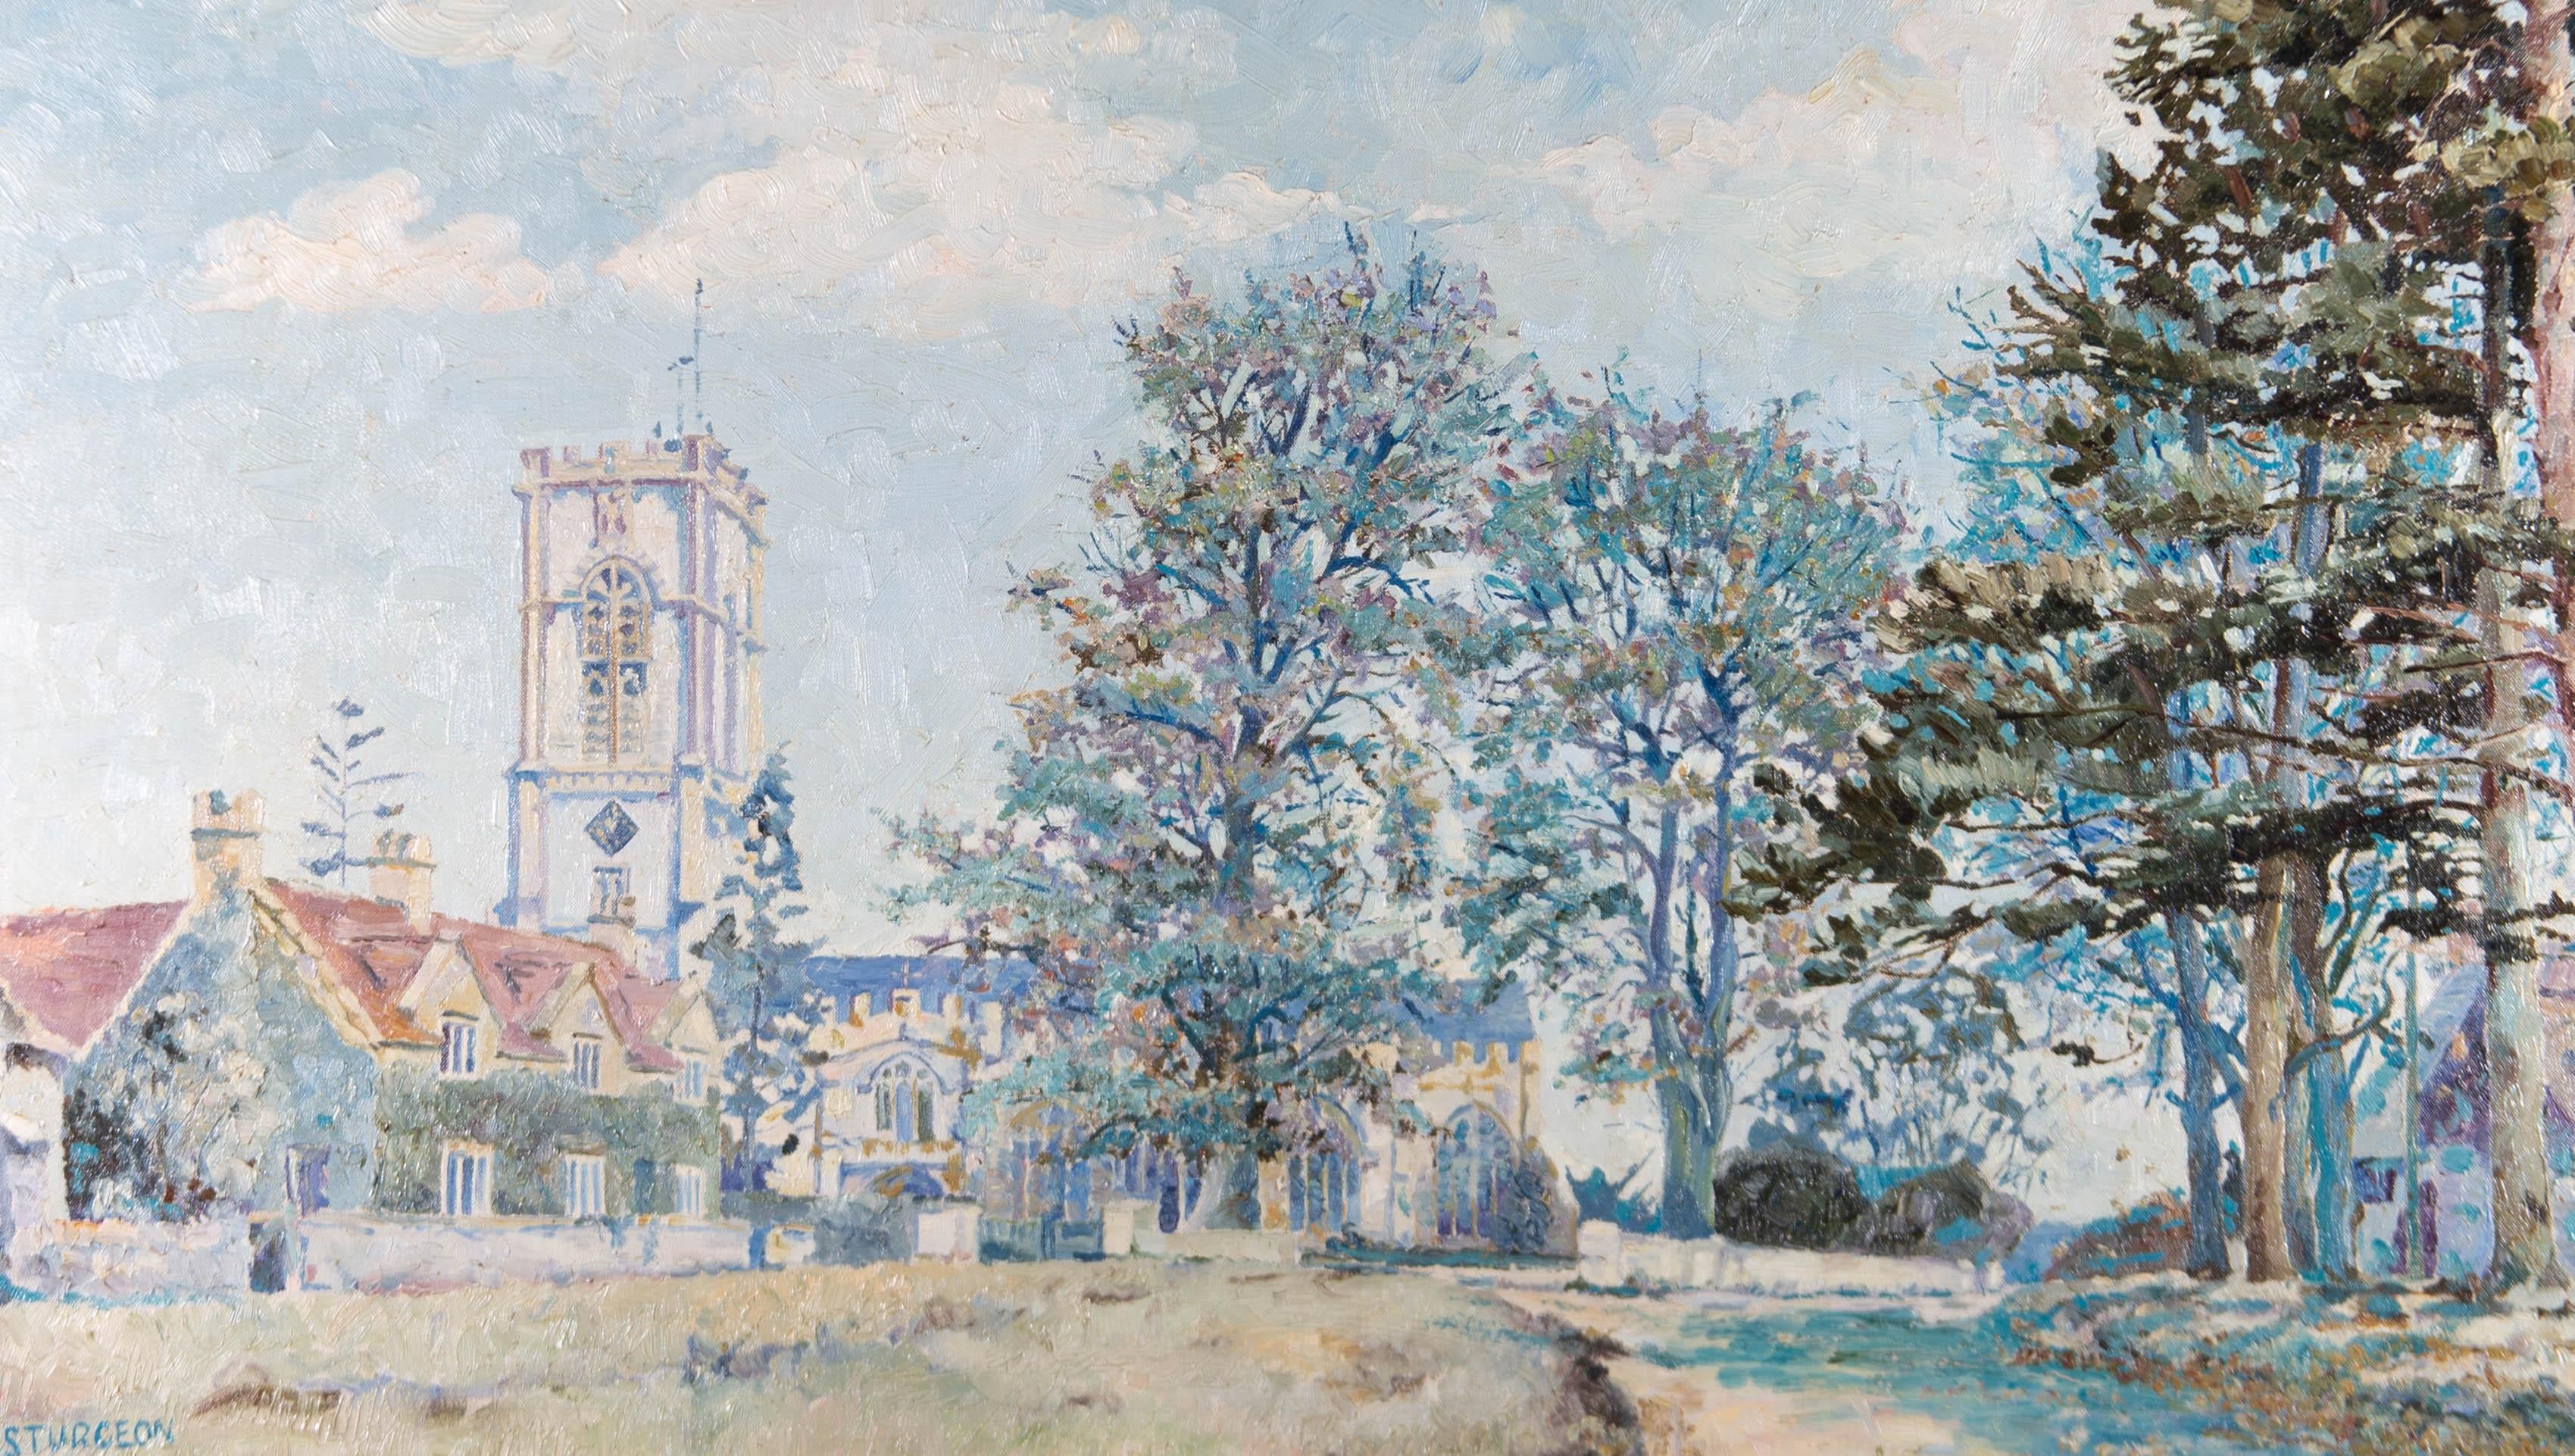 Cool blues and muted greens are accompanied by subdued terracottas to depict a village church in impressionistic pastel impastos. The artwork holds a happy, peaceful demeanor, and is signed in the bottom left-hand corner. On canvas on stretchers.
